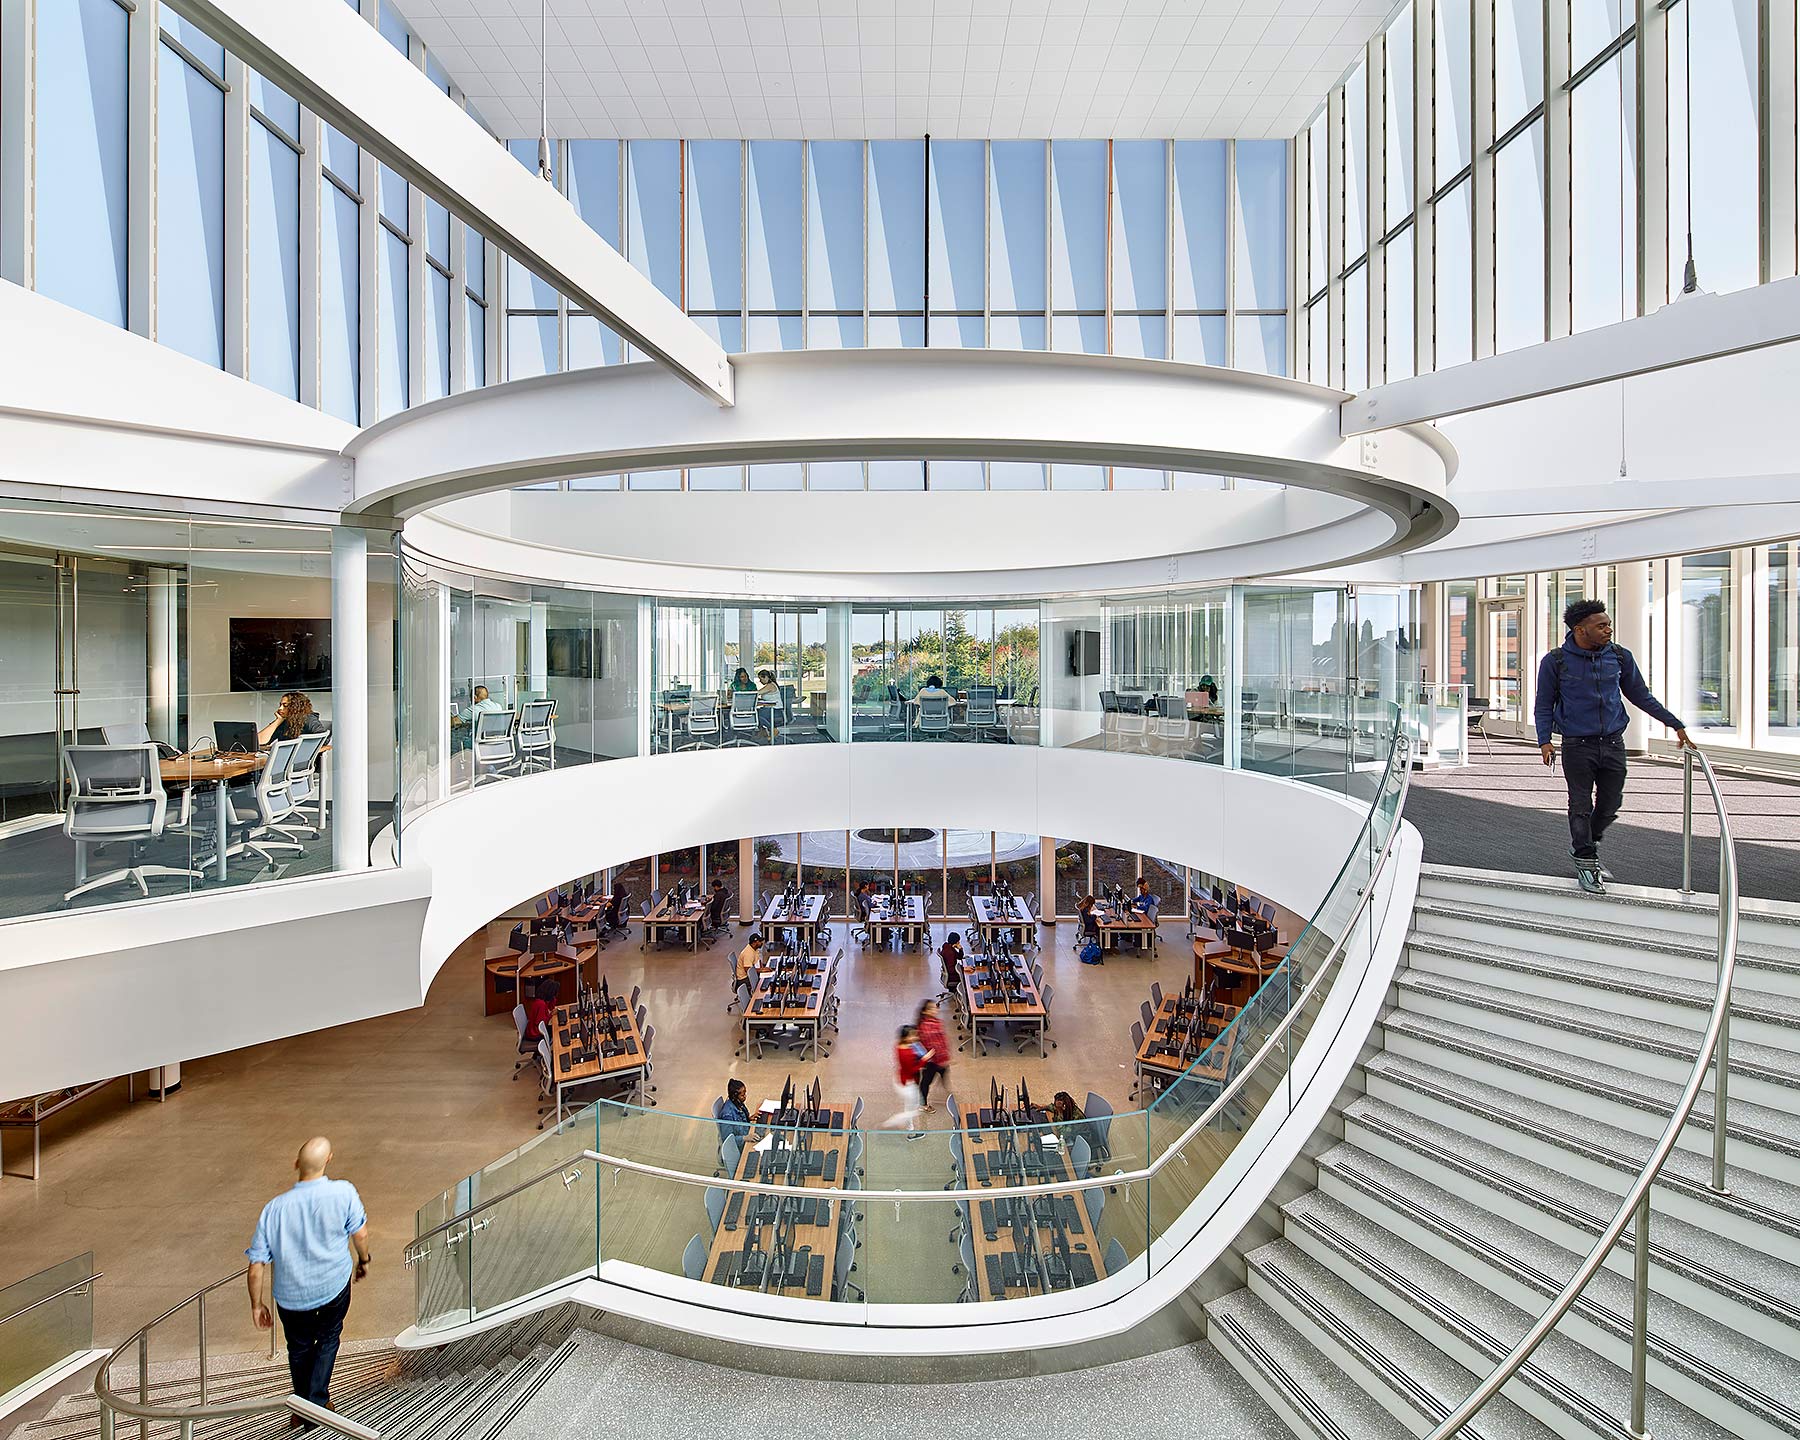  Suffolk County Community College Brentwood, NY ikon 5 Architects 